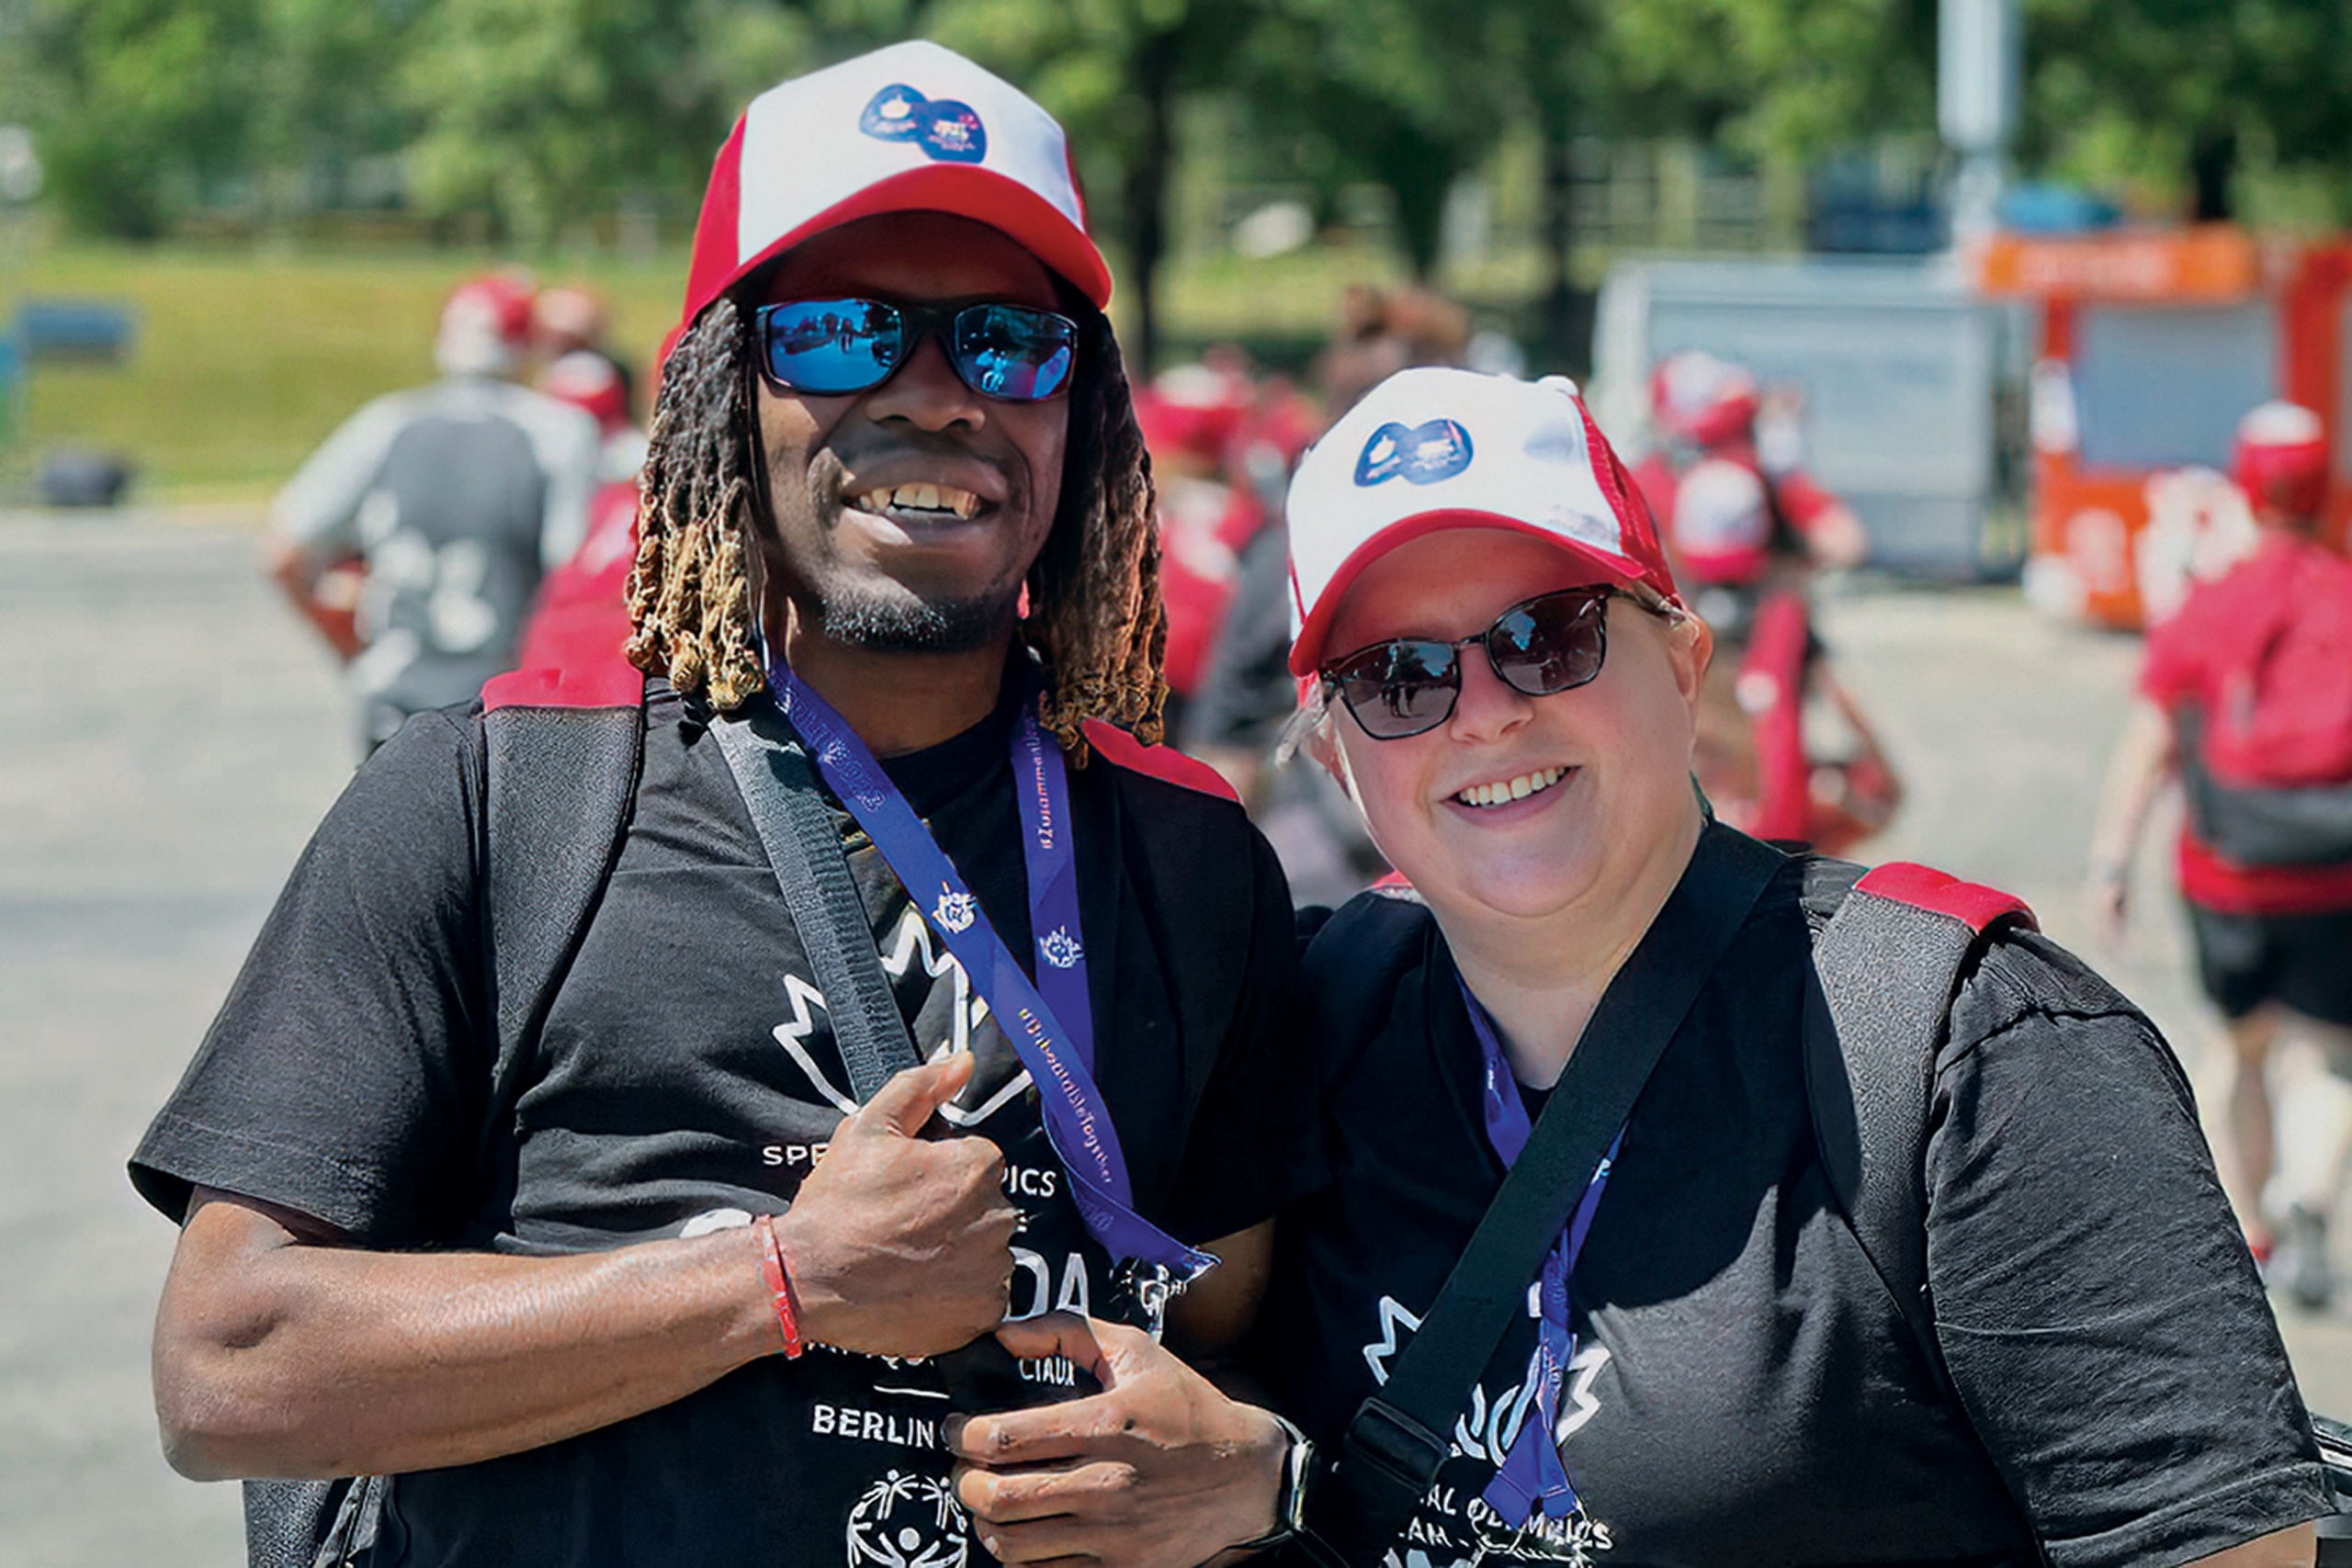 Special Olympics Team Canada athlete, Christian Gerro and his ASL interpreter, Erin Harper together in Berlin at the 2023 Special Olympics World Games